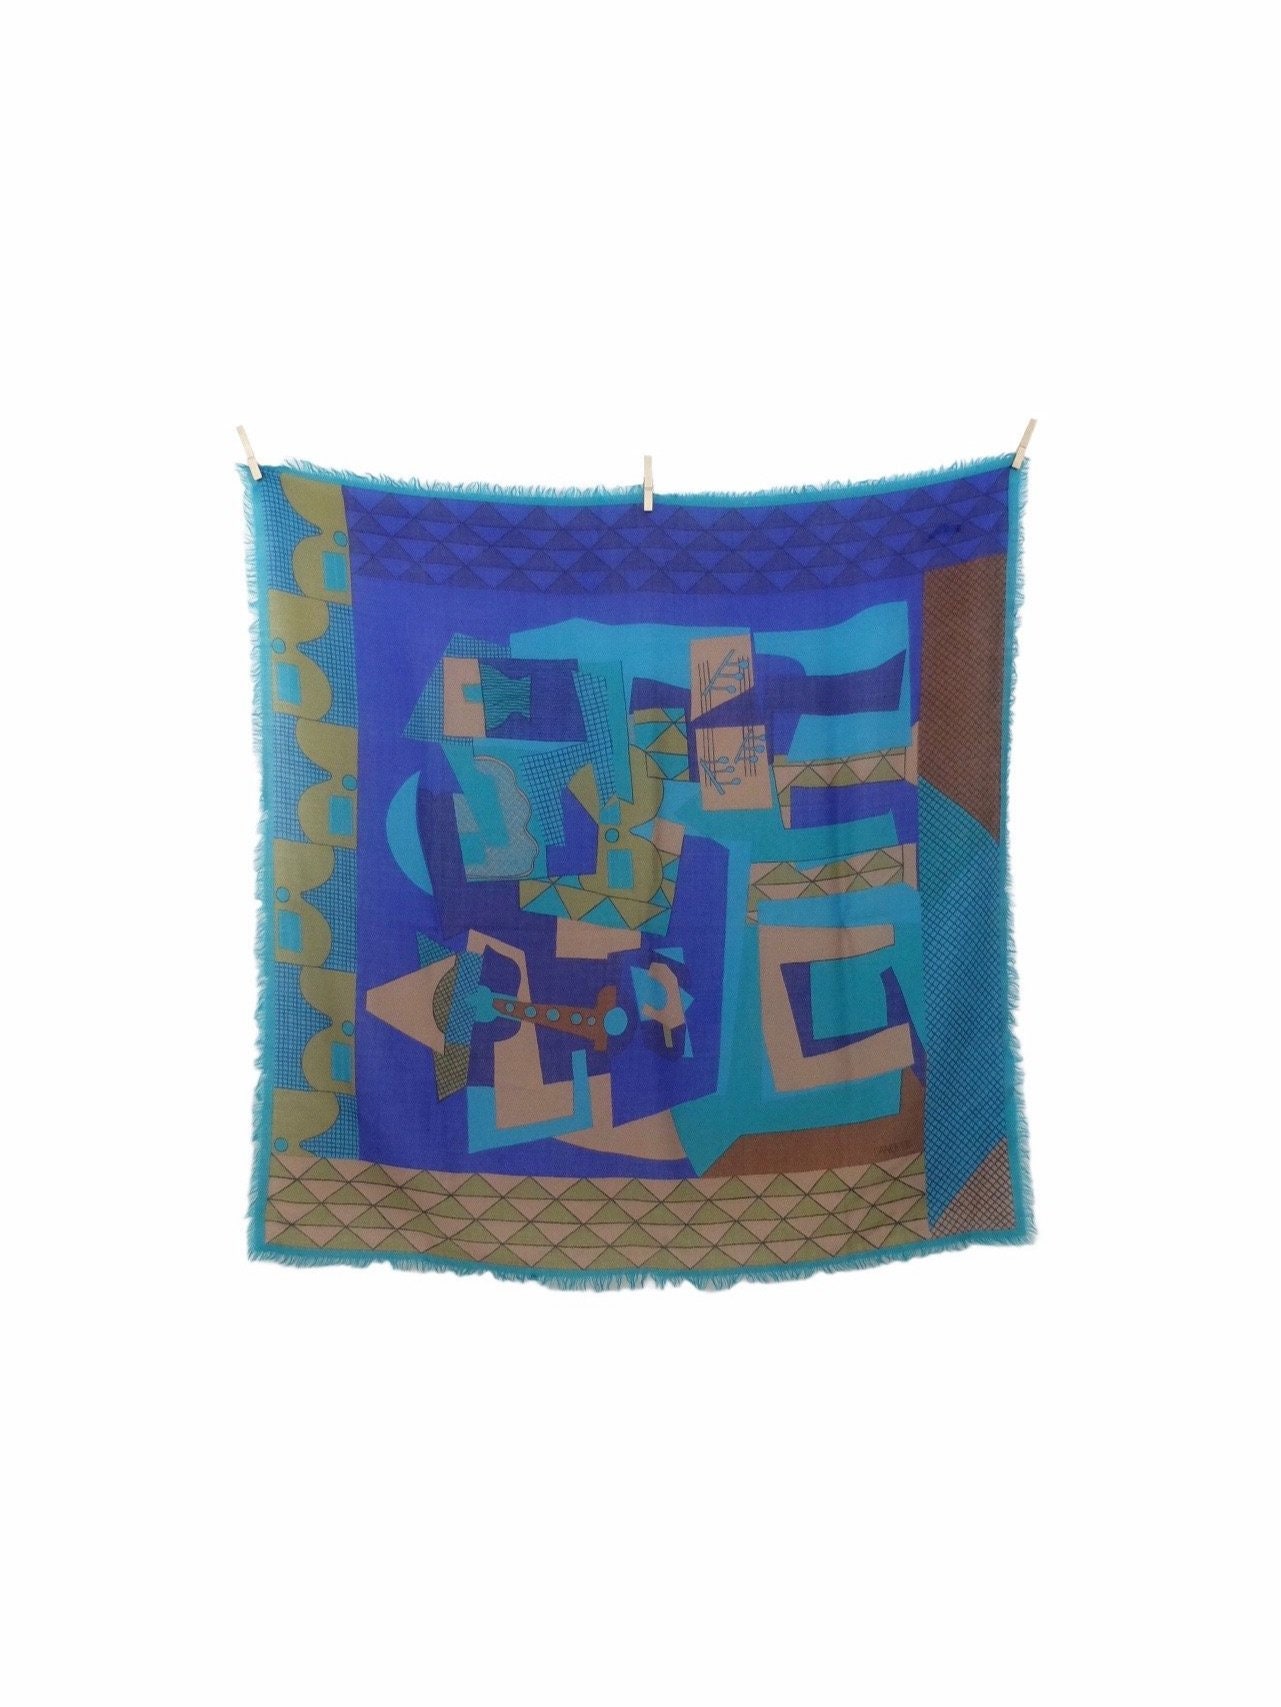 Vintage 70S Wool & Silk Blend Mod Bohemian Funky Avant-Garde Psychedelic Bright Blue Extra Large Square Bandana Neck Tie Scarf